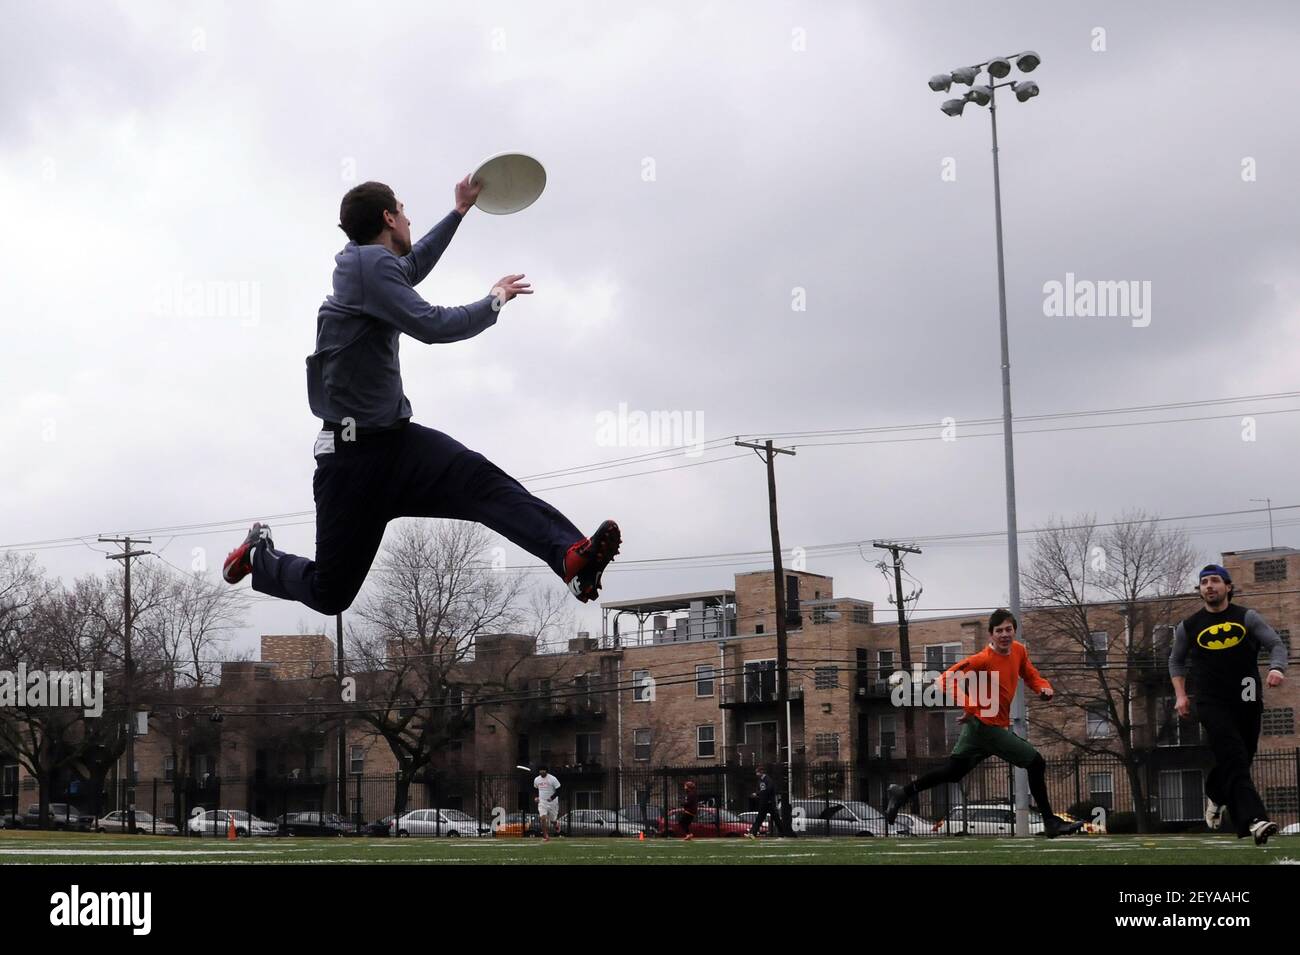 Feb 16, 2013 - WASHINGTON, DC - Gabe Webster, left, leaps into the air to  catch a pass during tryouts for the D.C. Breeze, a new ultimate Frisbee  professional team, at Woodland